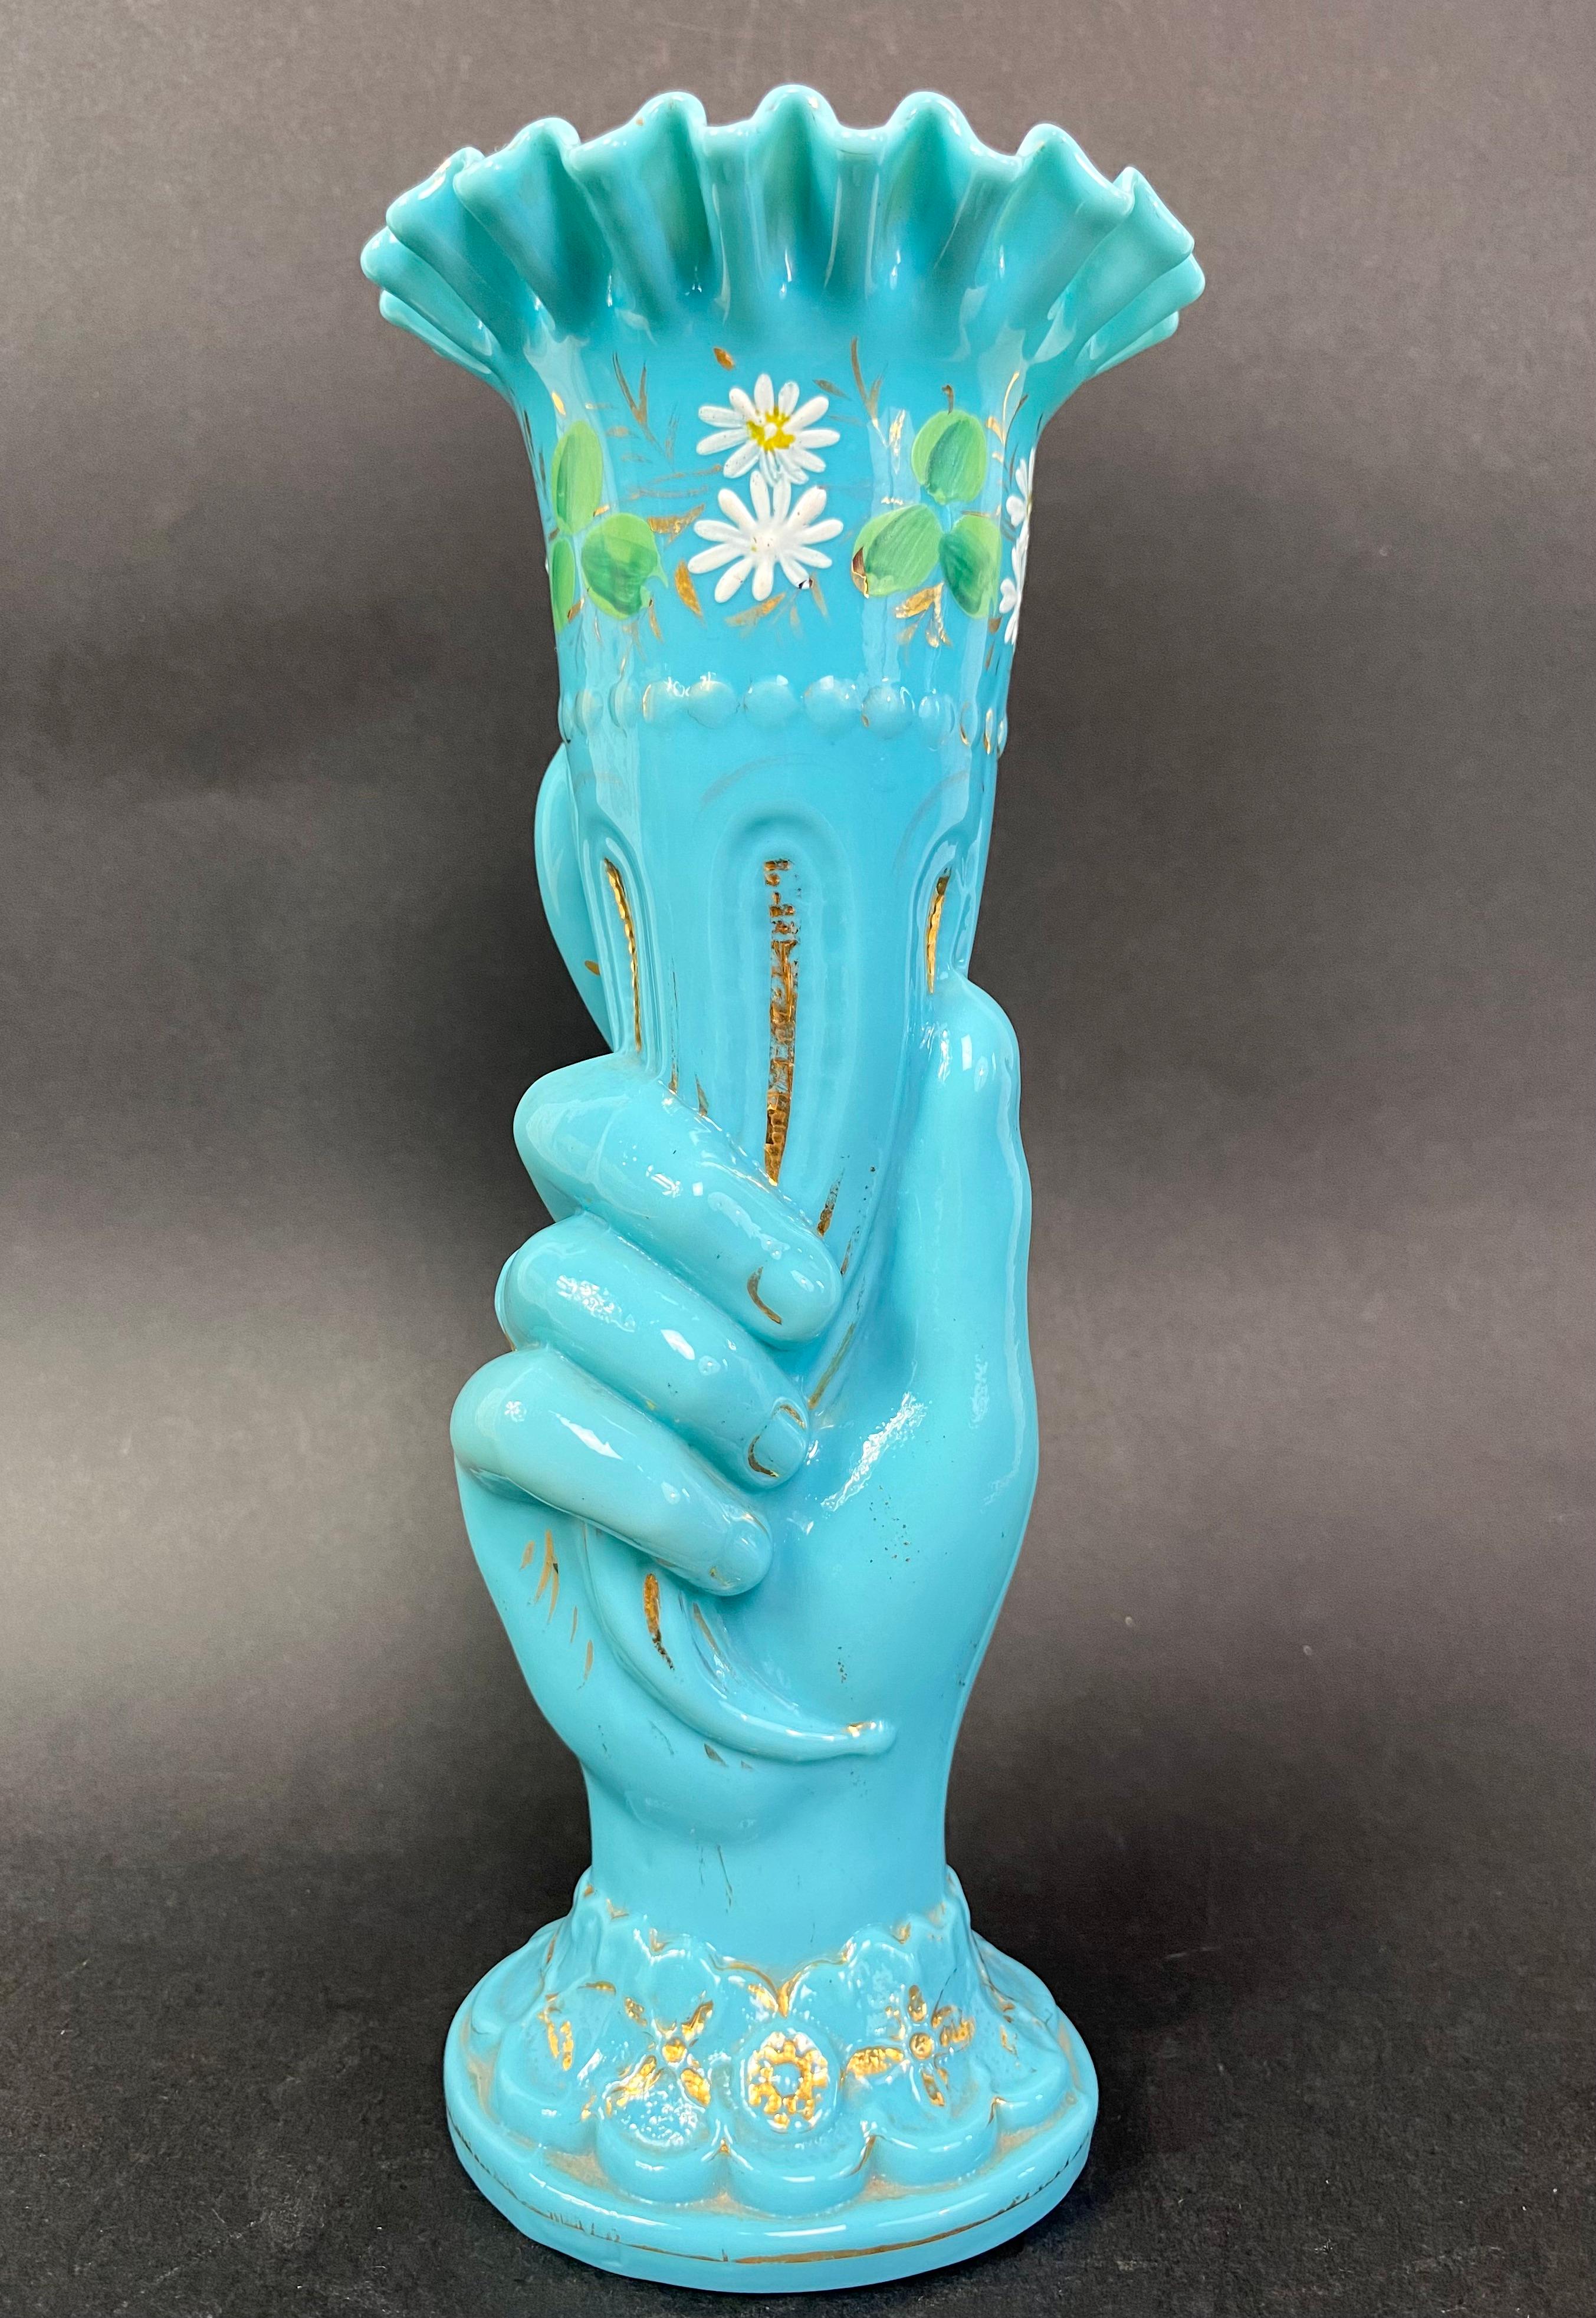 Blown blue opaline vase from the Portieux Vallerysthal crystal factory representing a hand holding a cornucopia and dating approximately from the 1920s
“Cornet” vase or “Main” vase
The ring finger wears a ring and the base represents the wrist of a